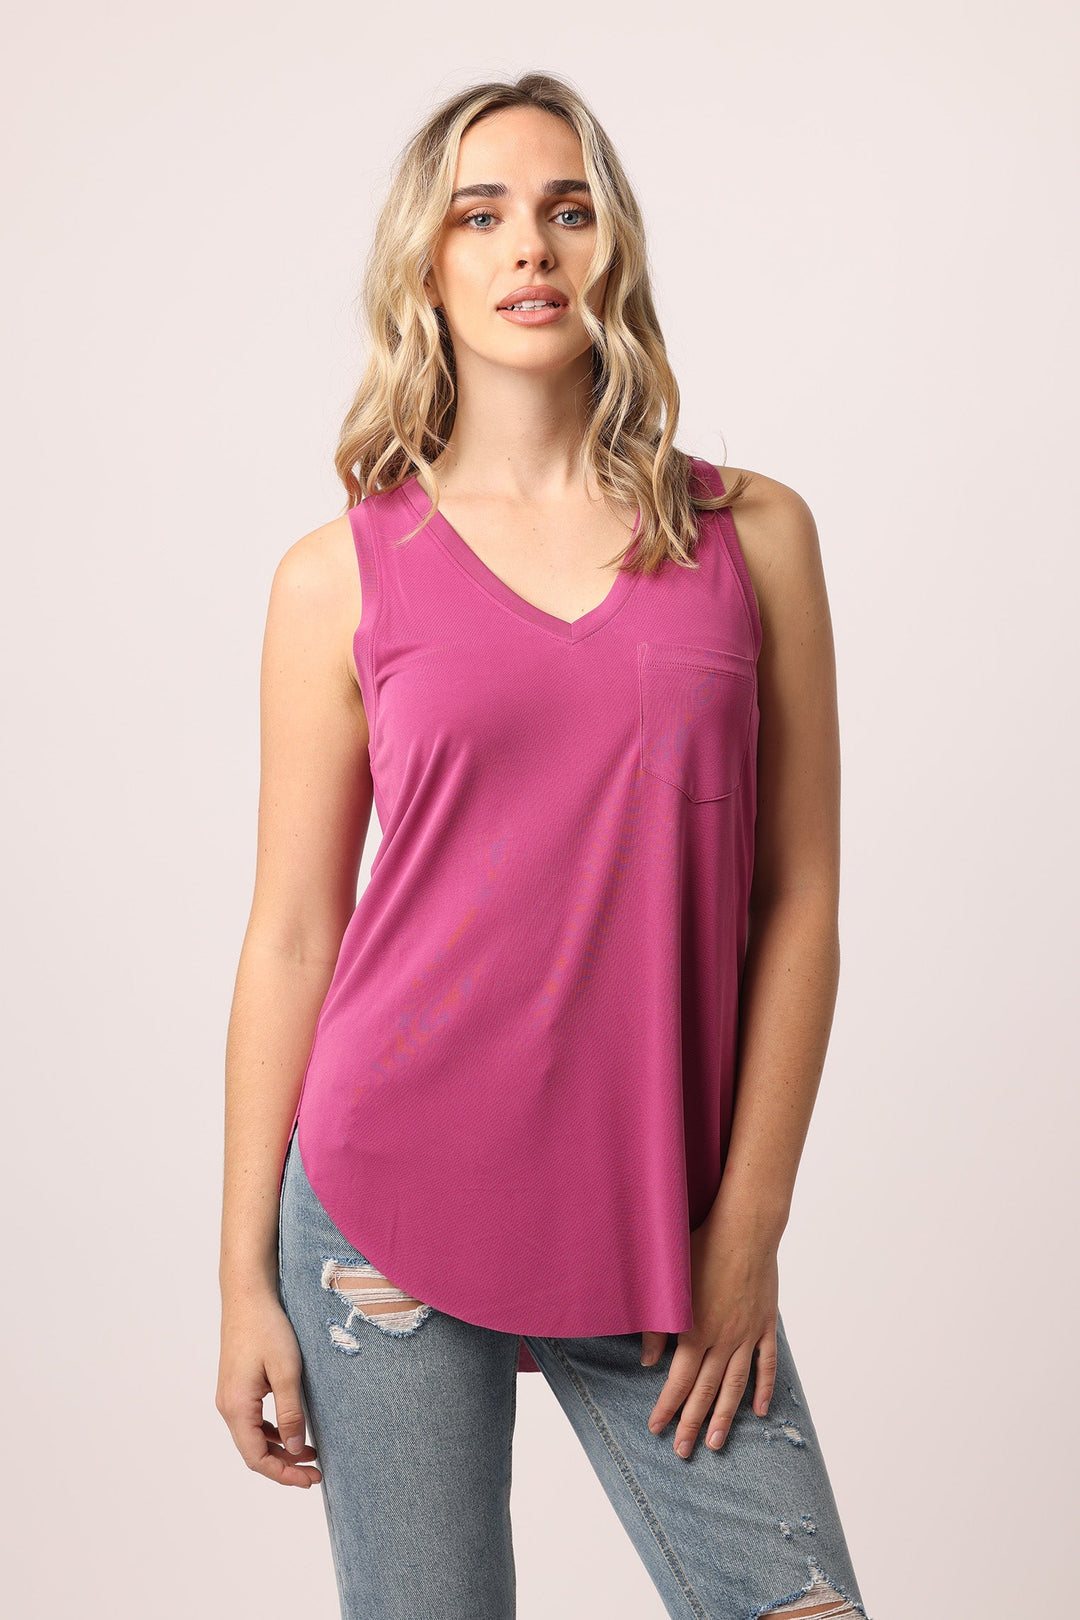 image of a female model wearing a ESTHER V NECK TANK FUCHSIA TANKS